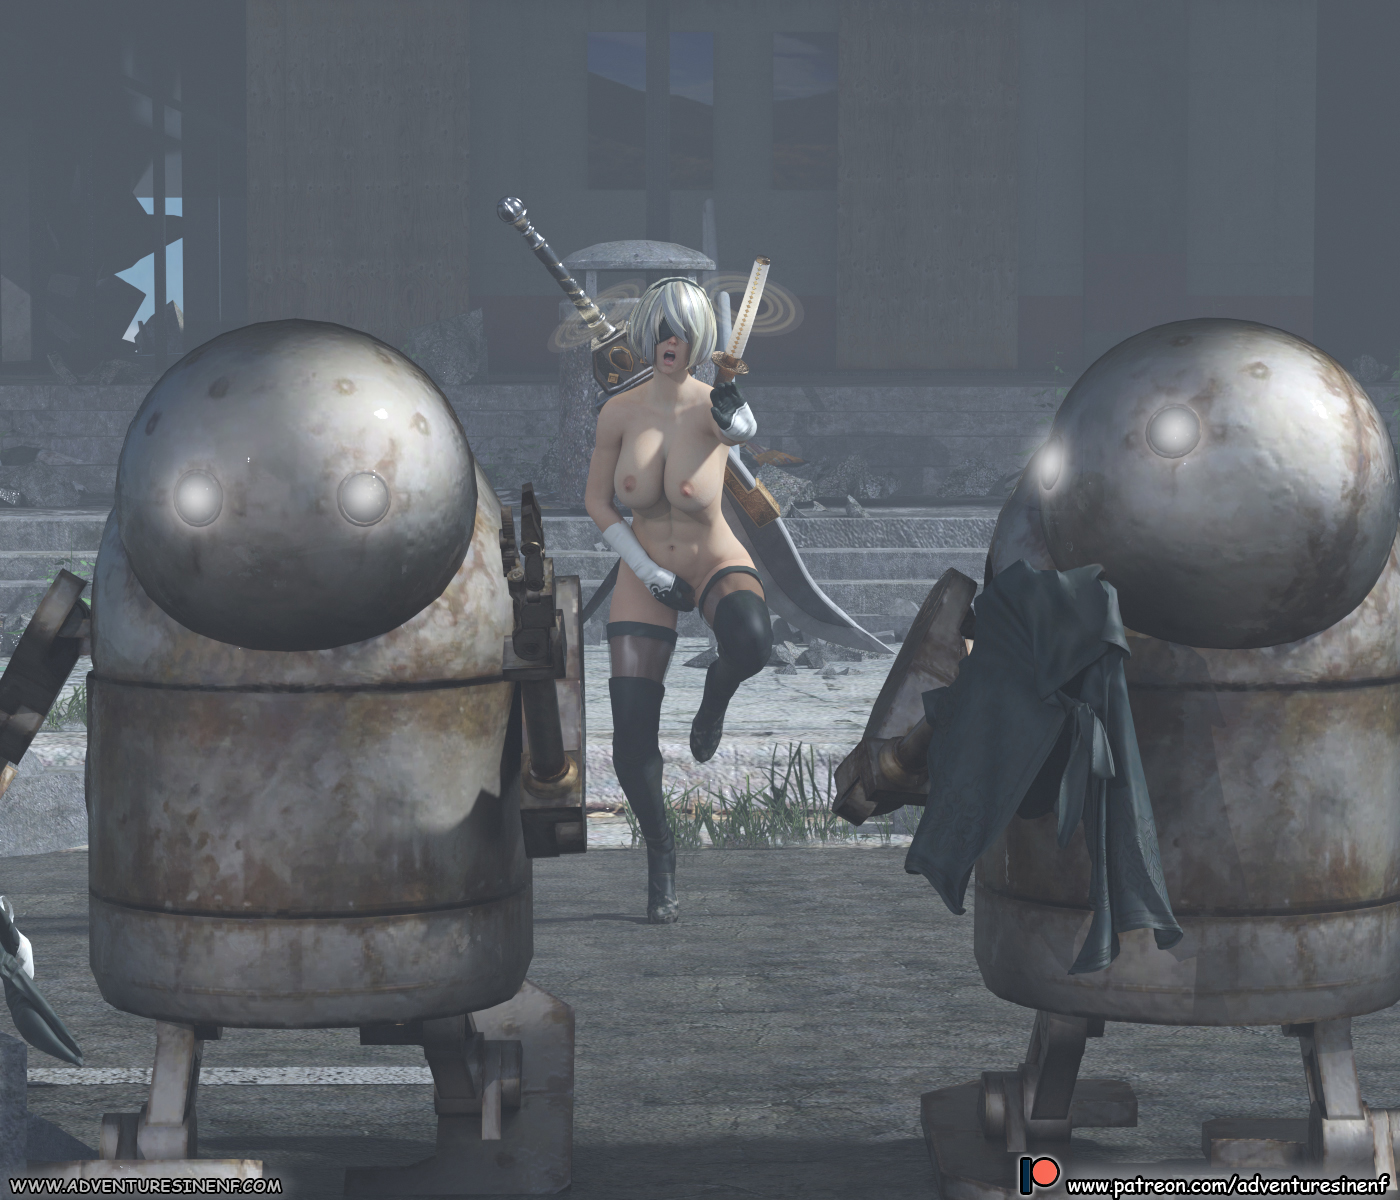 showing media posts for maze anal pool xxx #2b #nierautomata #StippedDown #stripped #enf #embarrassed #VideoGames #running #stolenclothes #humiliated #swords #warrior #Android #naked